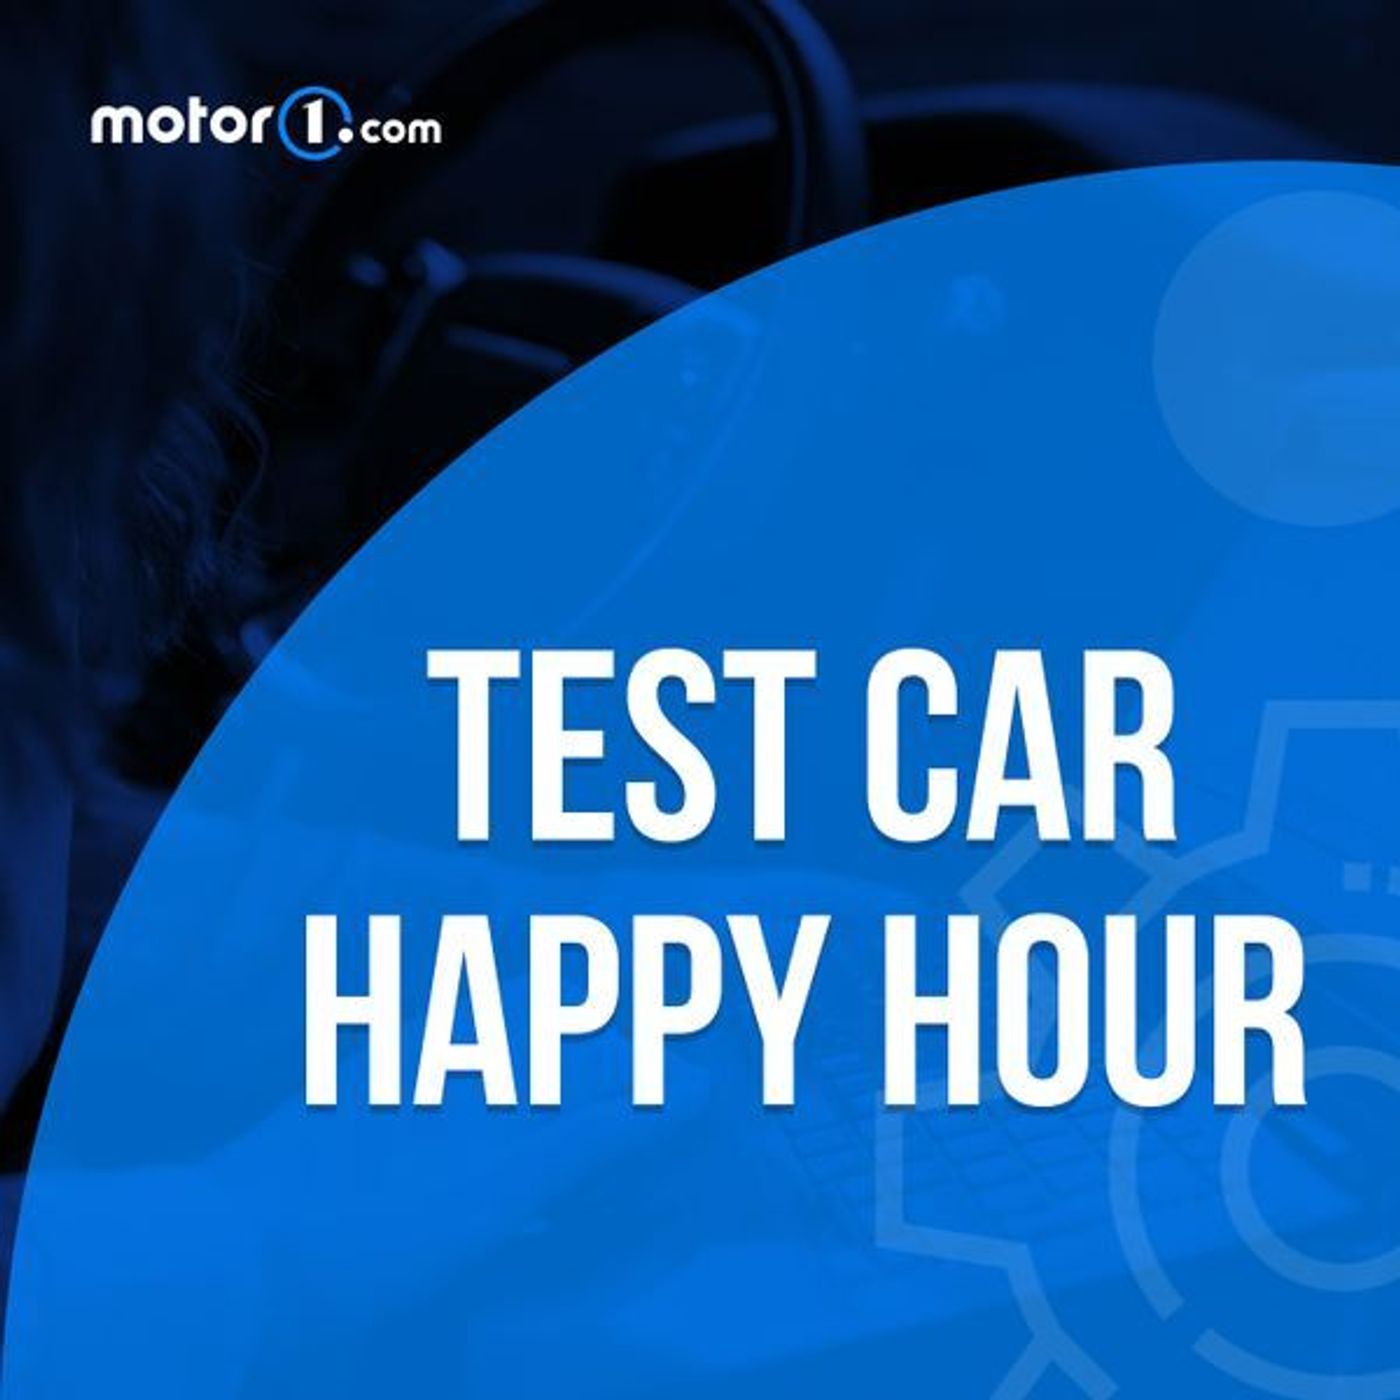 S1 Ep47: Motor1 Test Car Happy Hour 47: The Best And Worst BMW Today